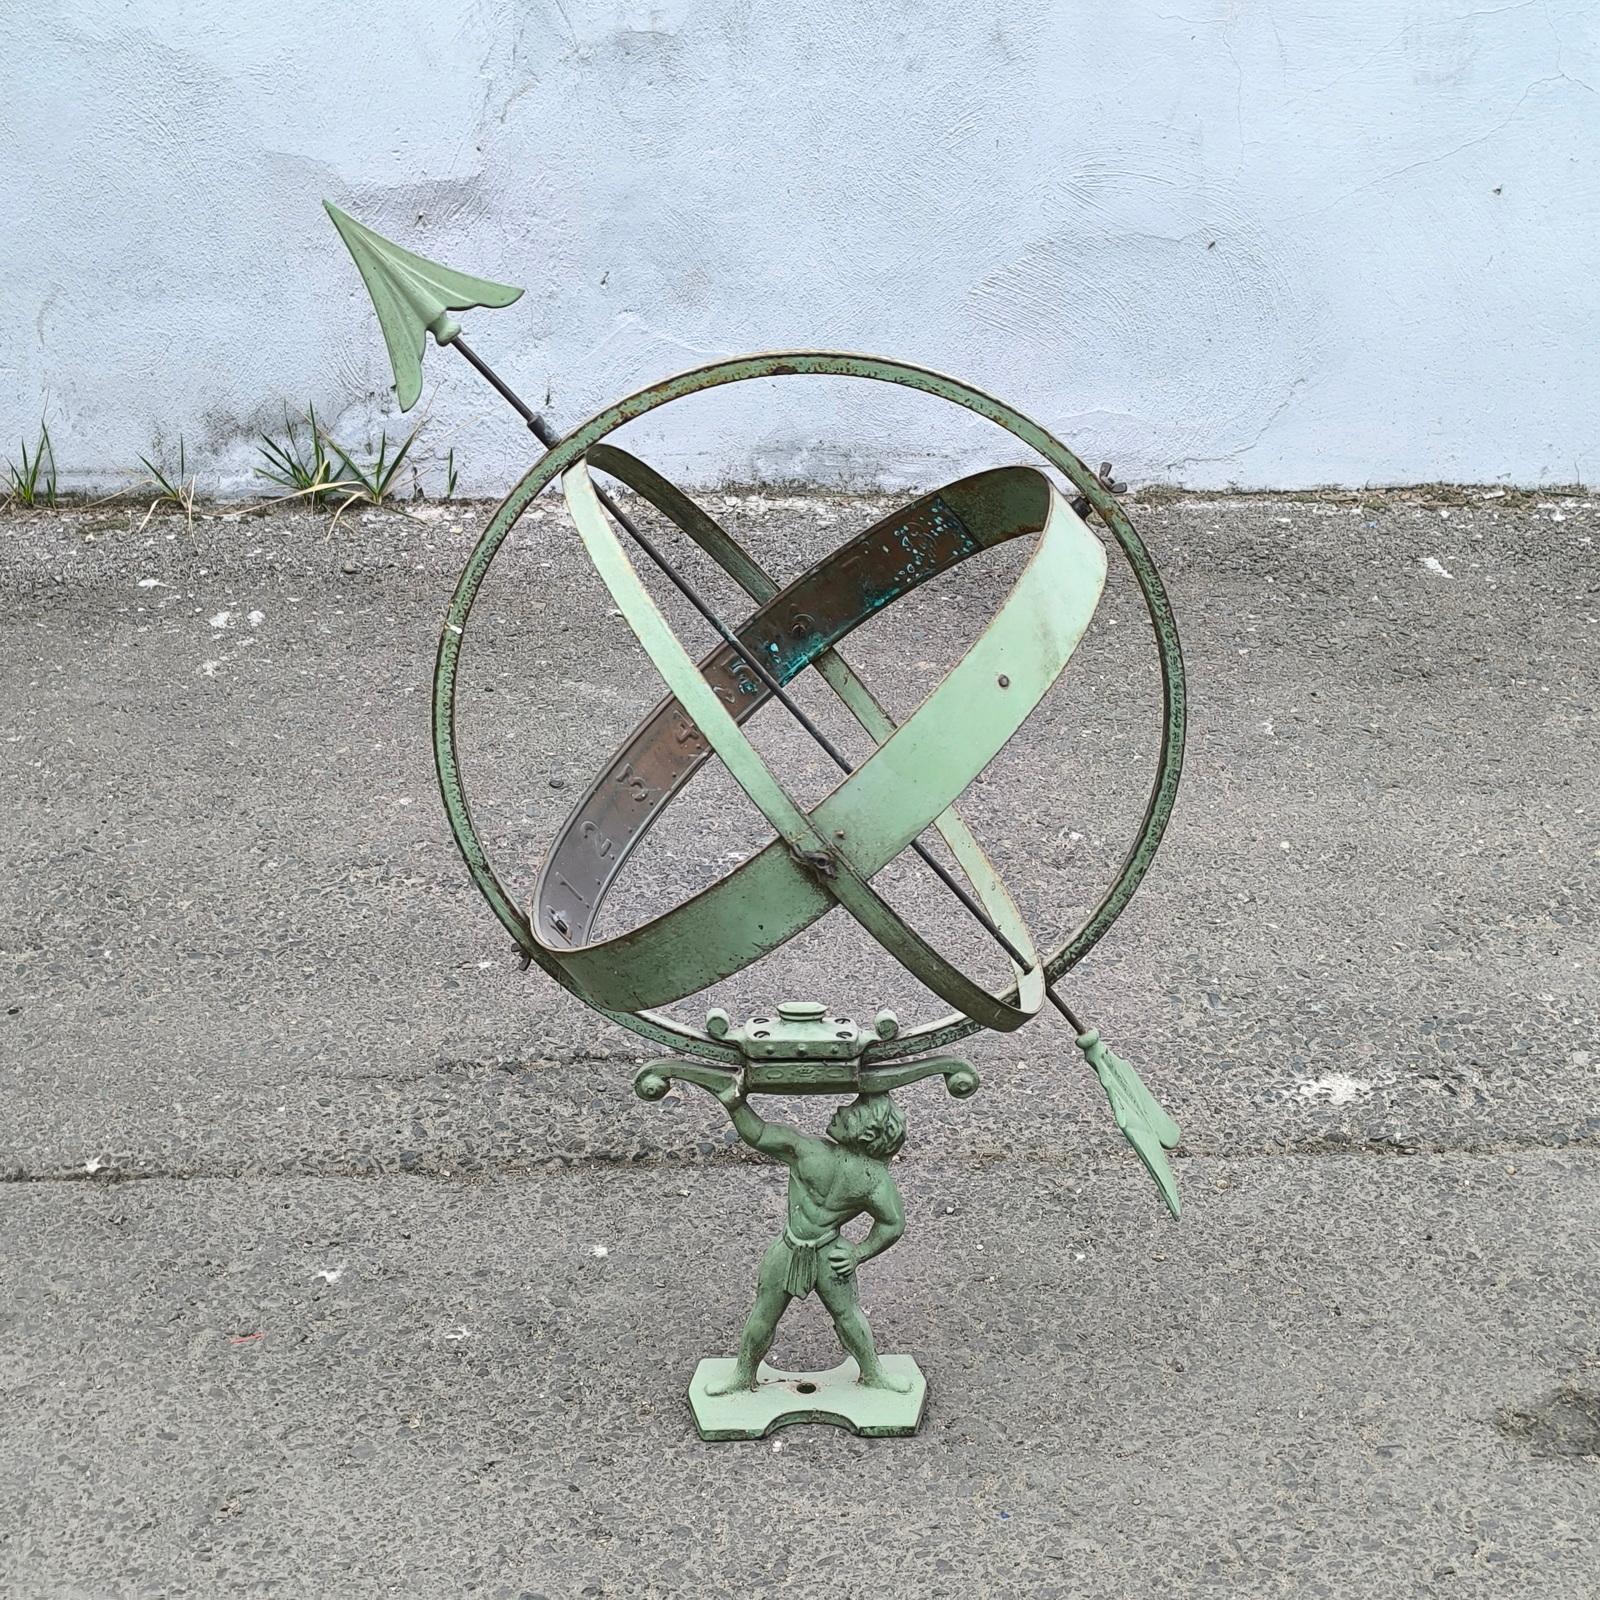 Art Deco Vintage Swedish Atlas Armillary Sundial Attributed to Sune Roth For Sale